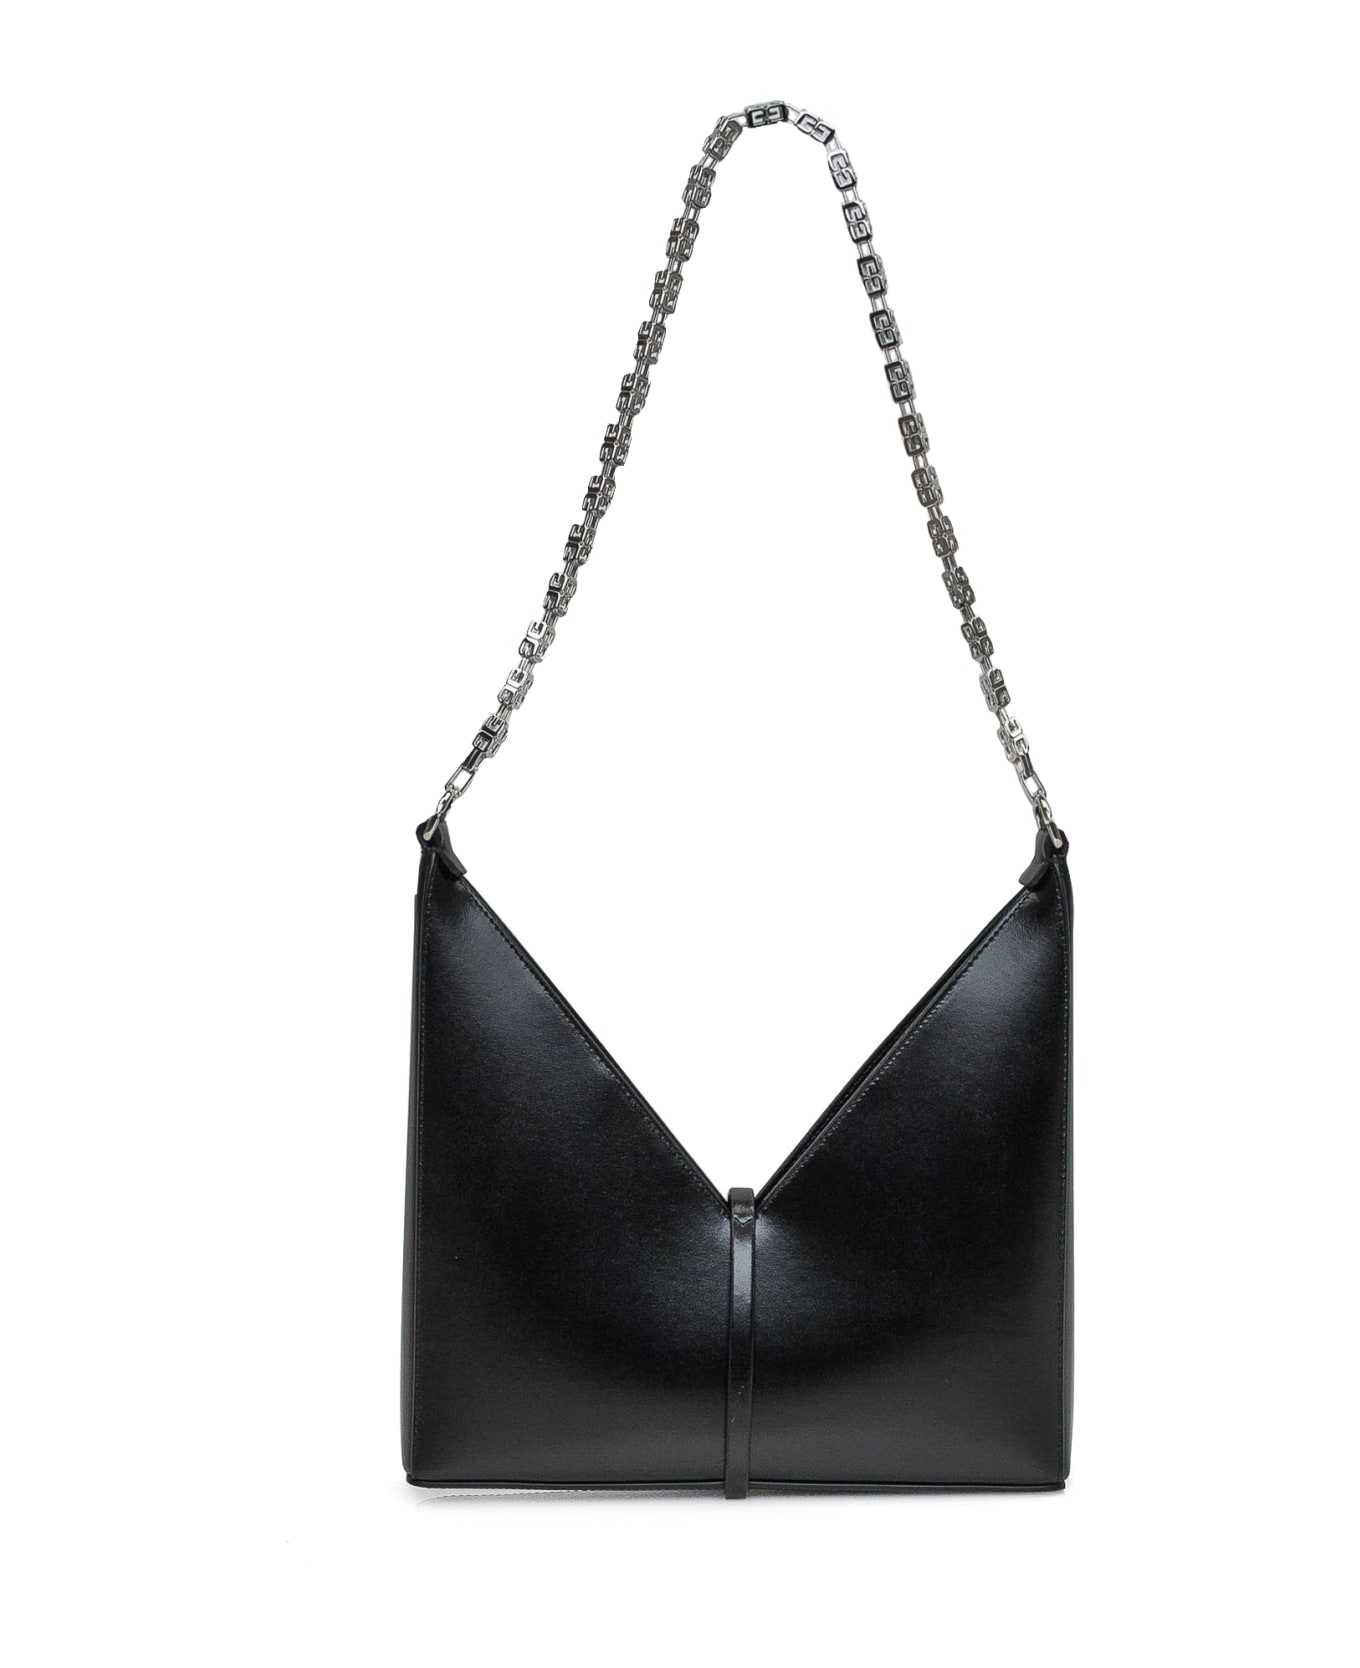 Givenchy Cut Out Small Bag - BLACK